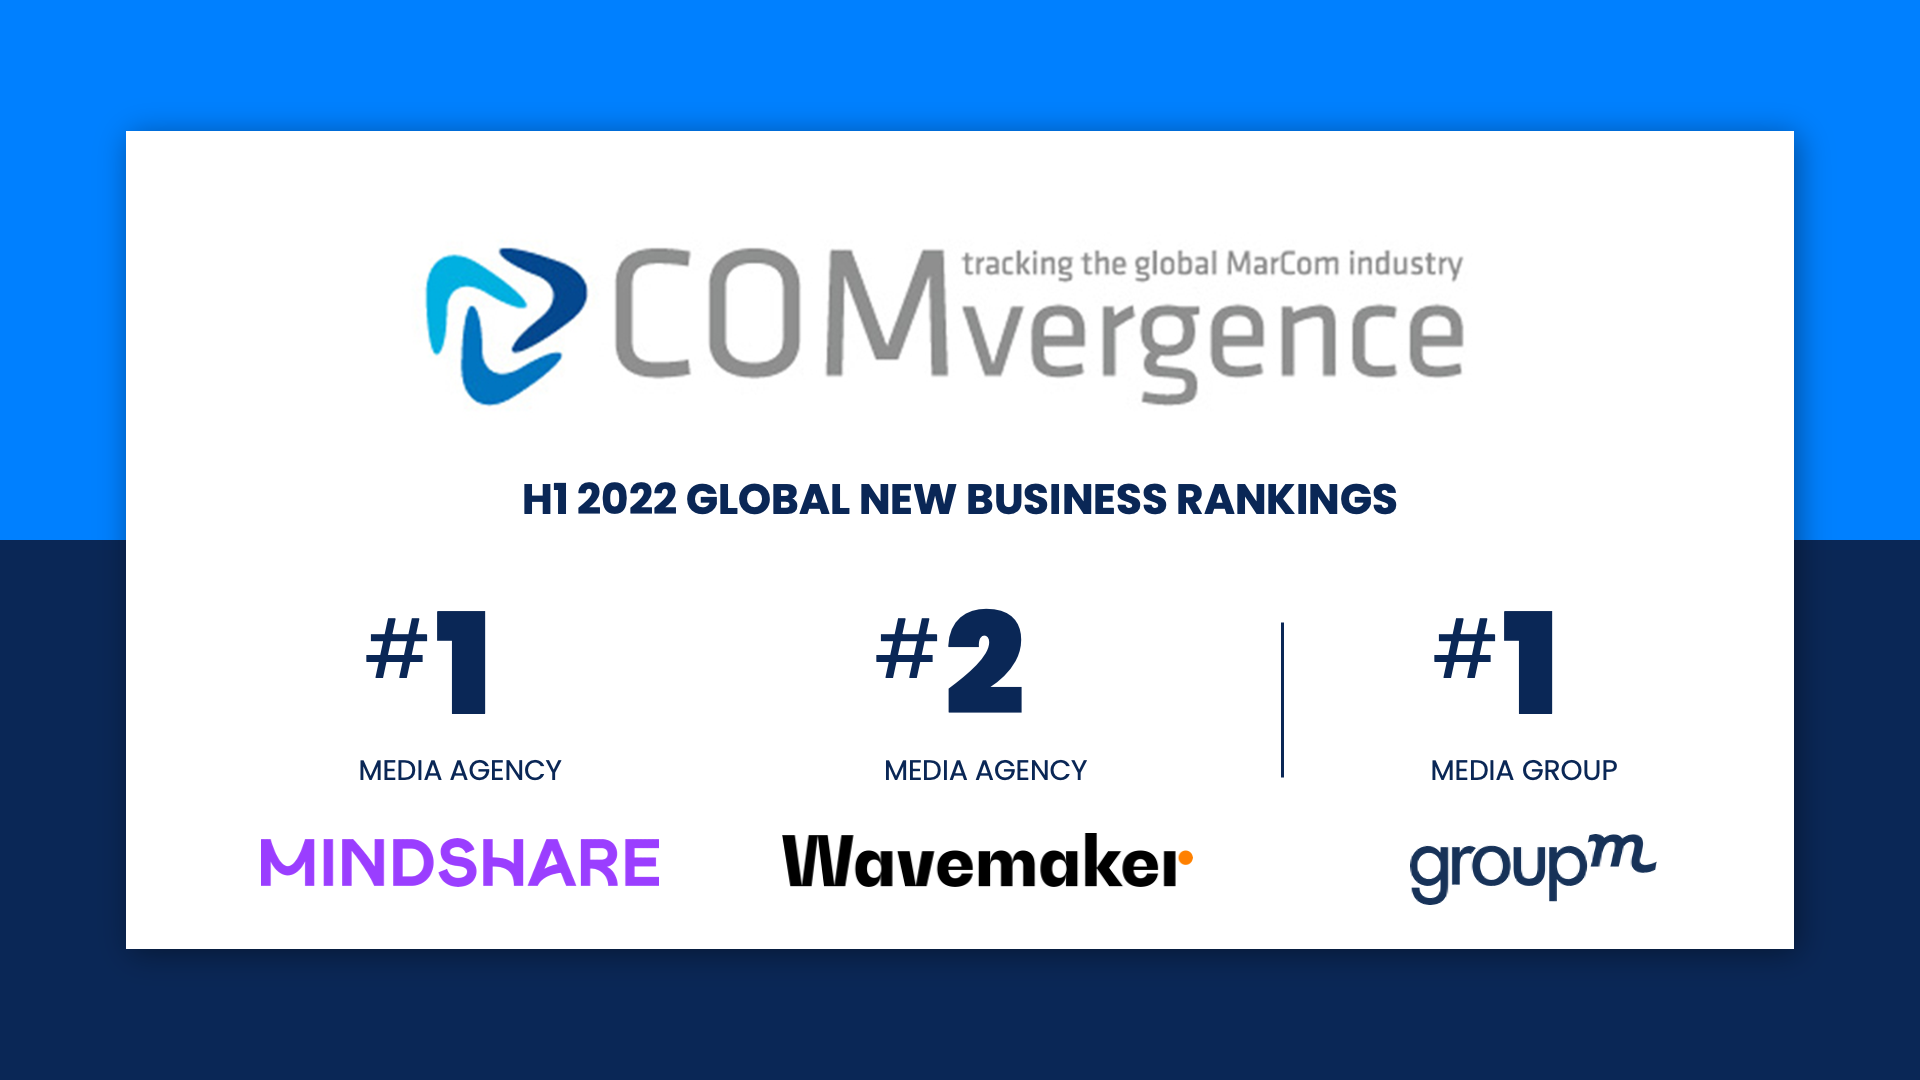 GroupM Leads in 2022 1H COMvergence Net New Business Rankings - GroupM